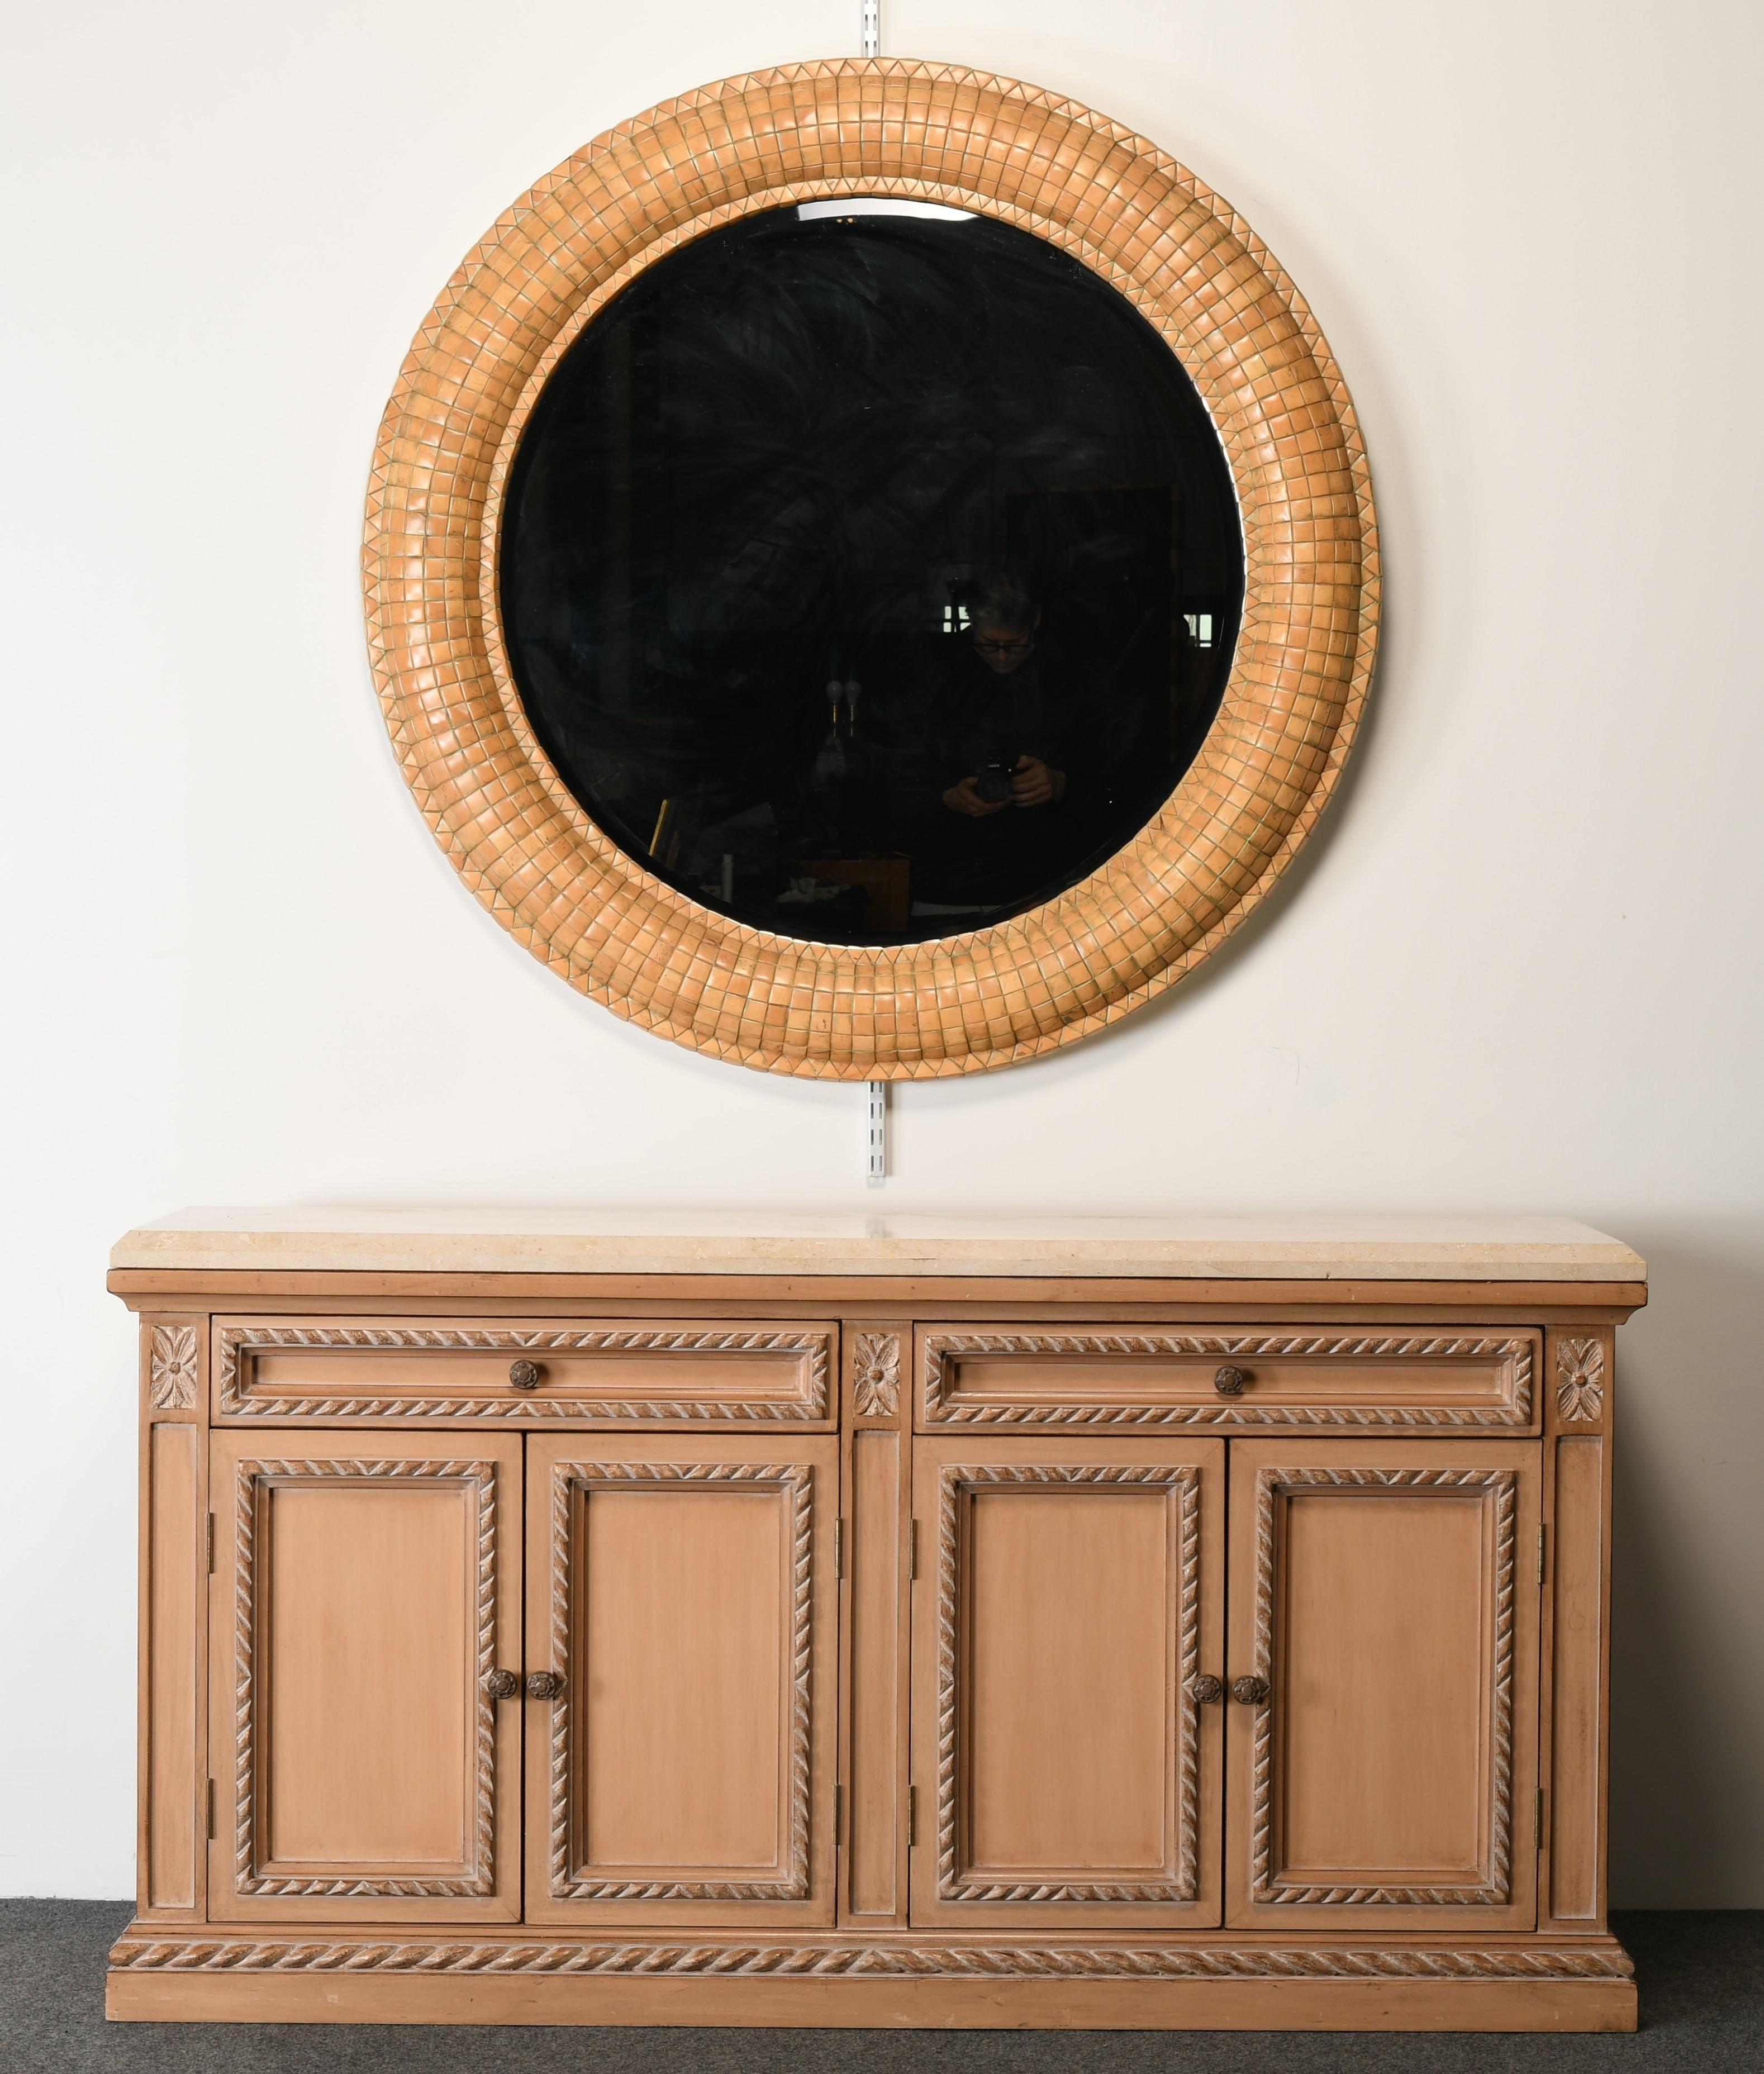 A grand-scale mirror made of tile composite by Kreiss Furniture. This stunning mirror would look great in any contemporary interior. This comes out of a beautifully decorated designer home on the Main Line in Philadelphia. The mirror has beveled